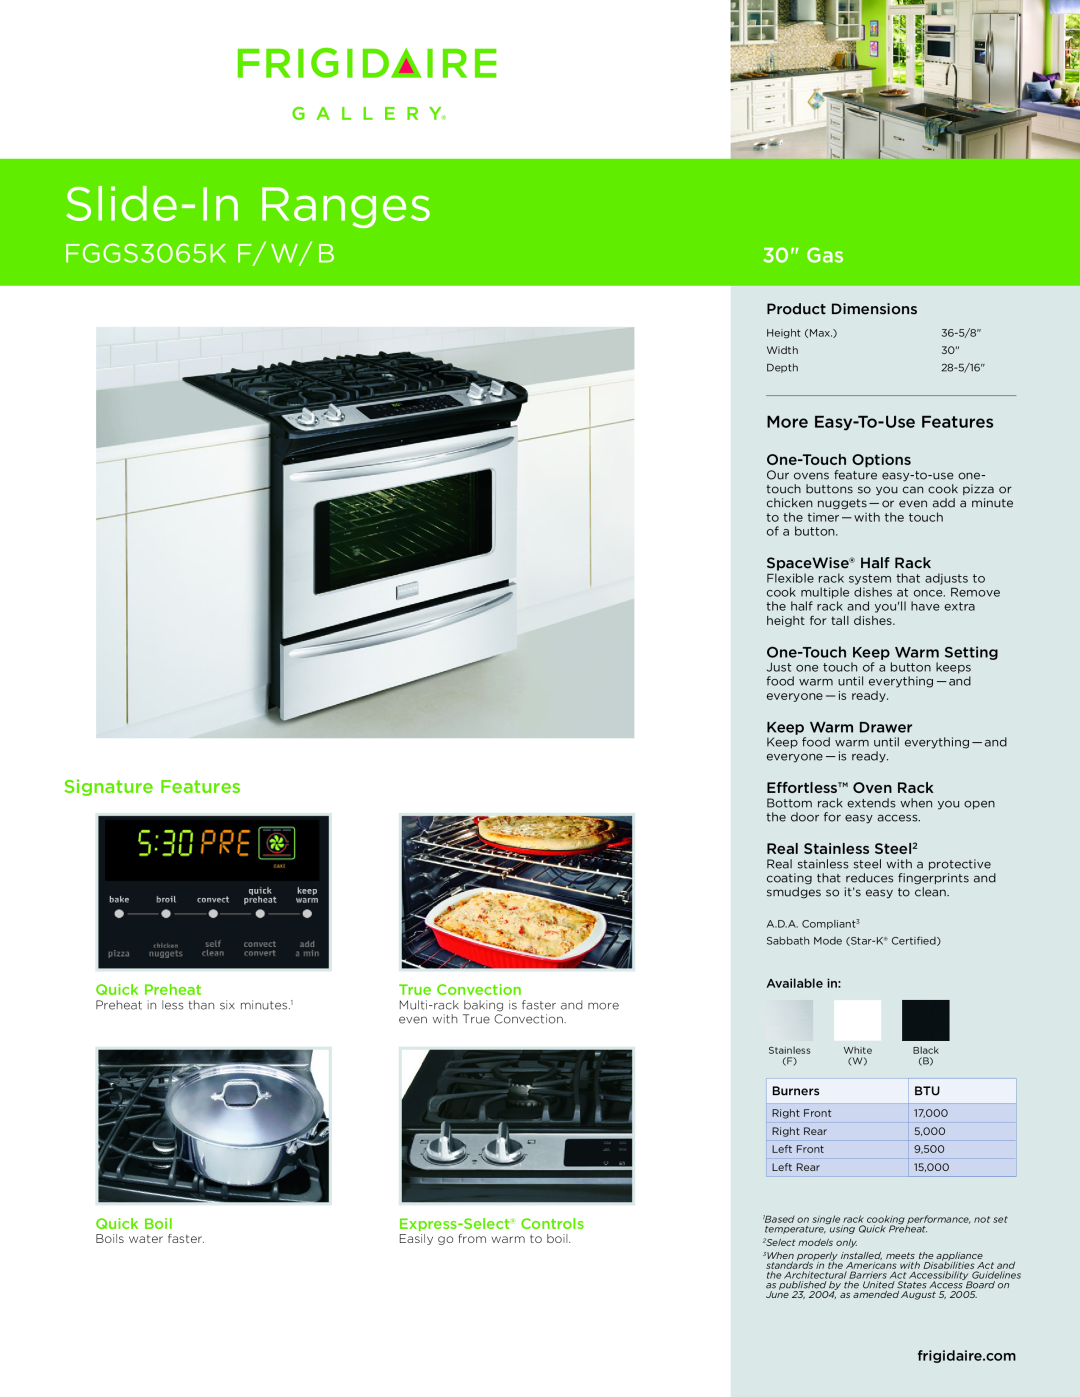 Frigidaire FGGS3065K dimensions Effortless Performance, Performance-DrivenStyle, SpaceWise Design, One-TouchOptions 